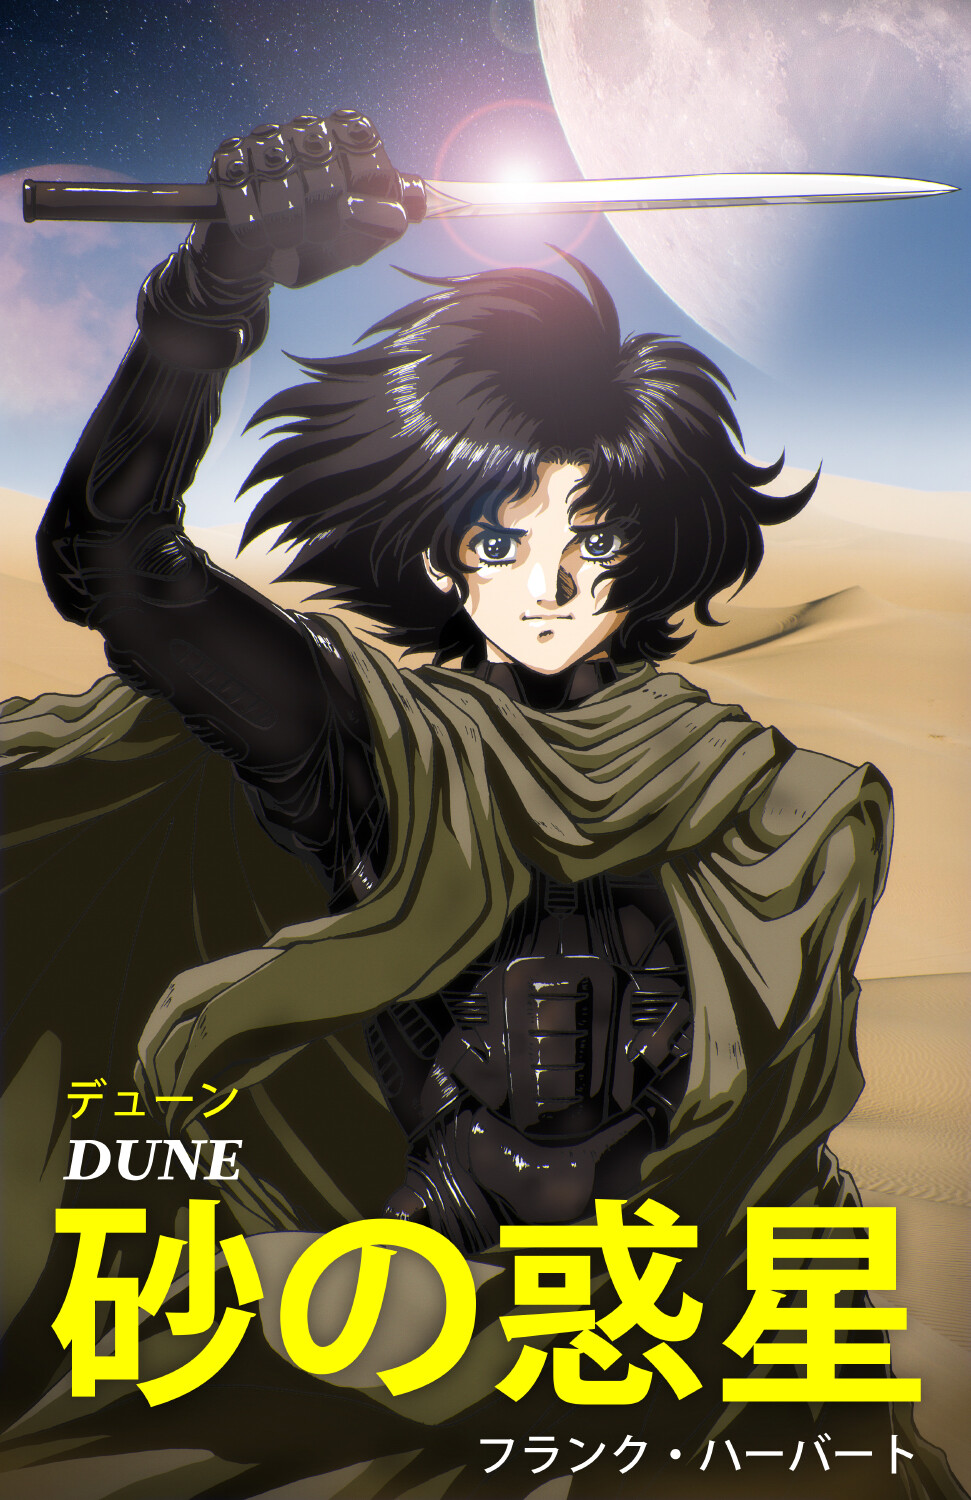 dennis-pulido-dune-fan-art-hires-with-text.jpg